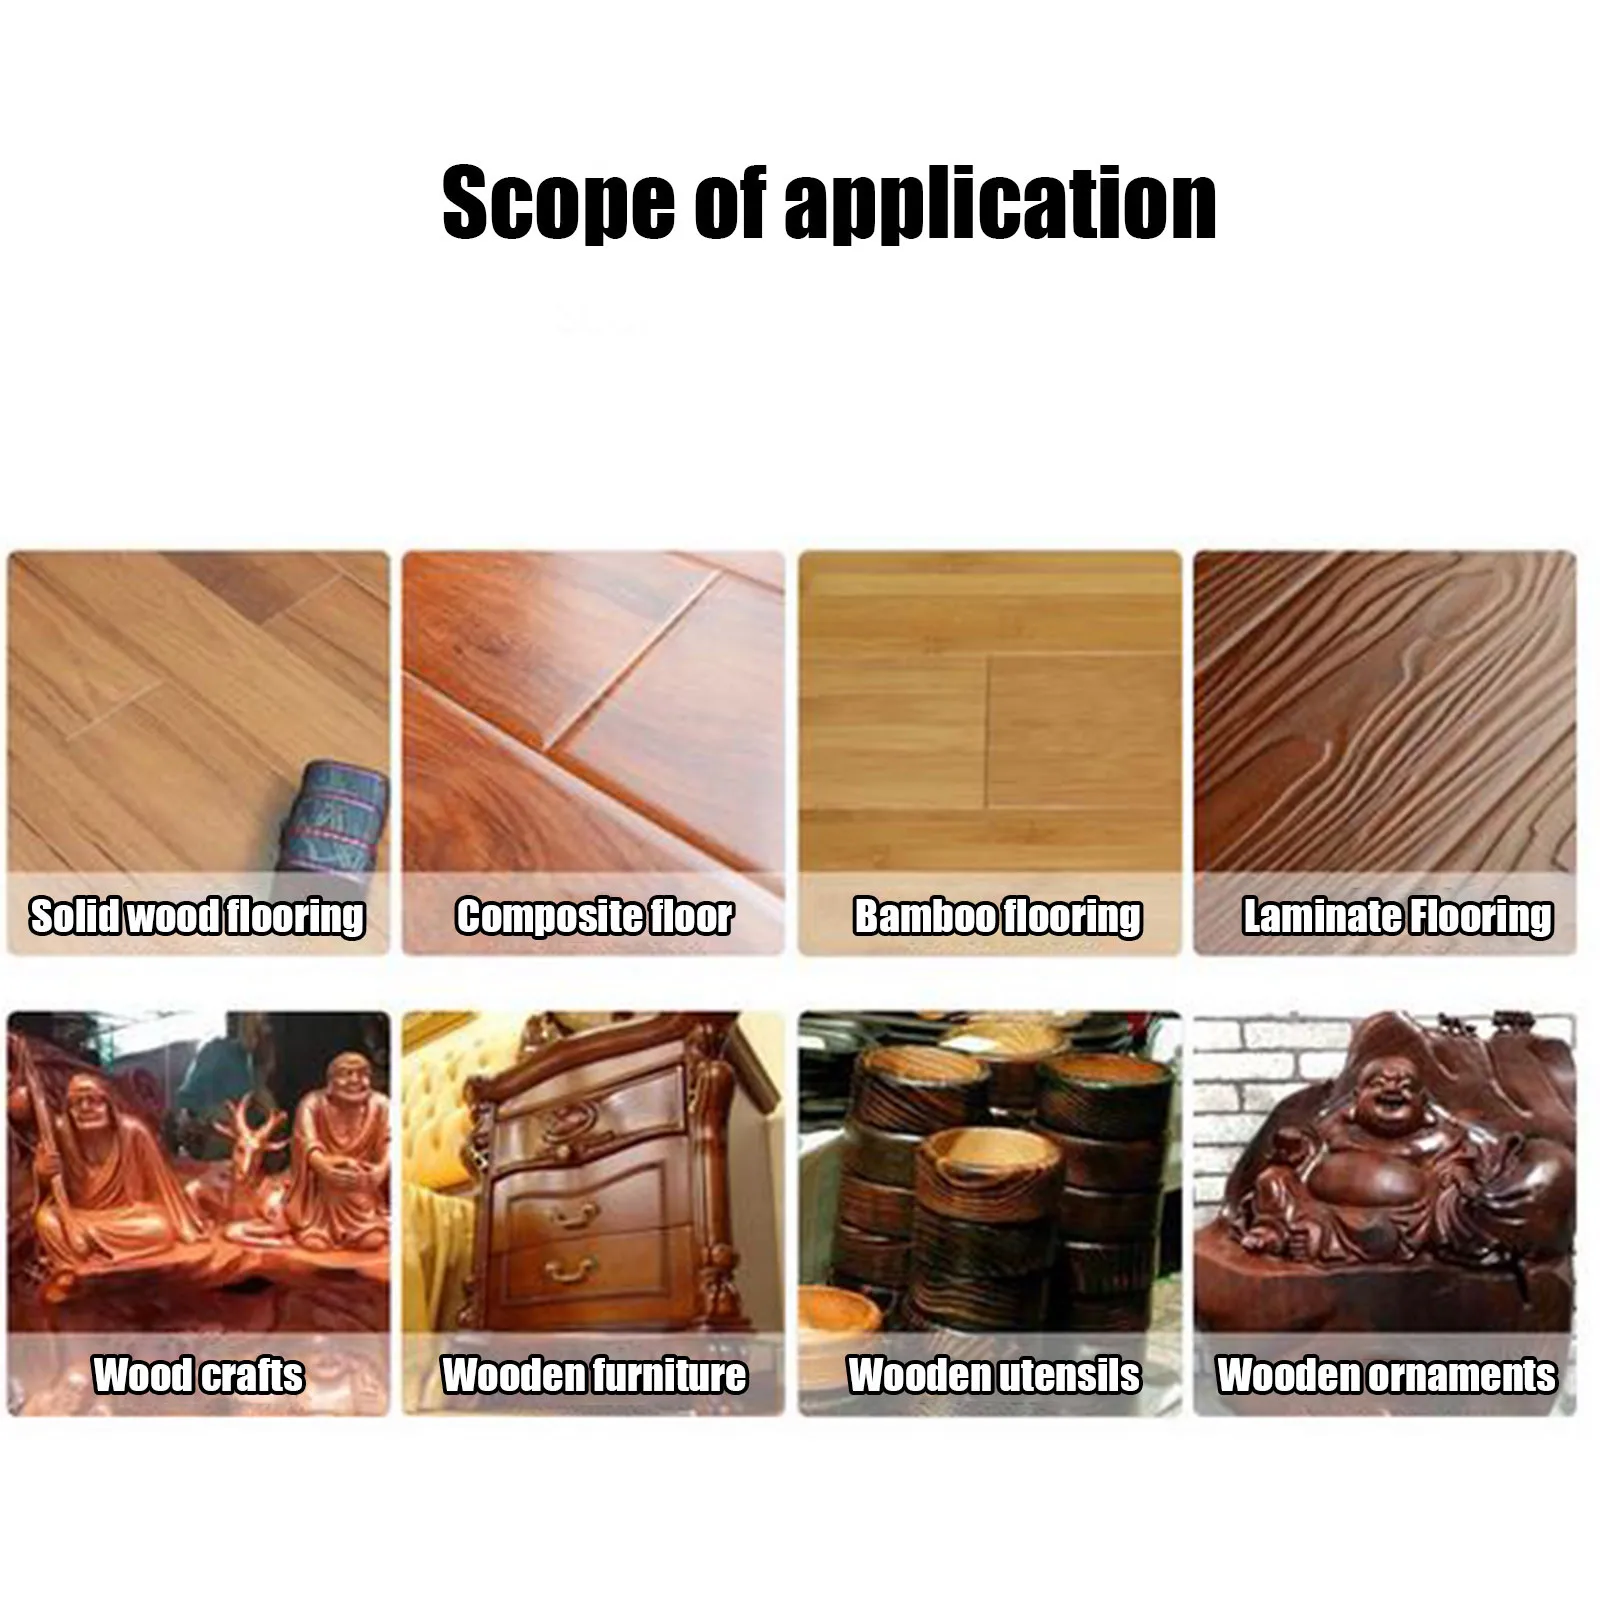 Wood Seasoning Beewax Complete Solution Furniture Care Beeswax Home Cleaning Removes Wax And Dirt Polishes Natural Beeswax#35  Дом и